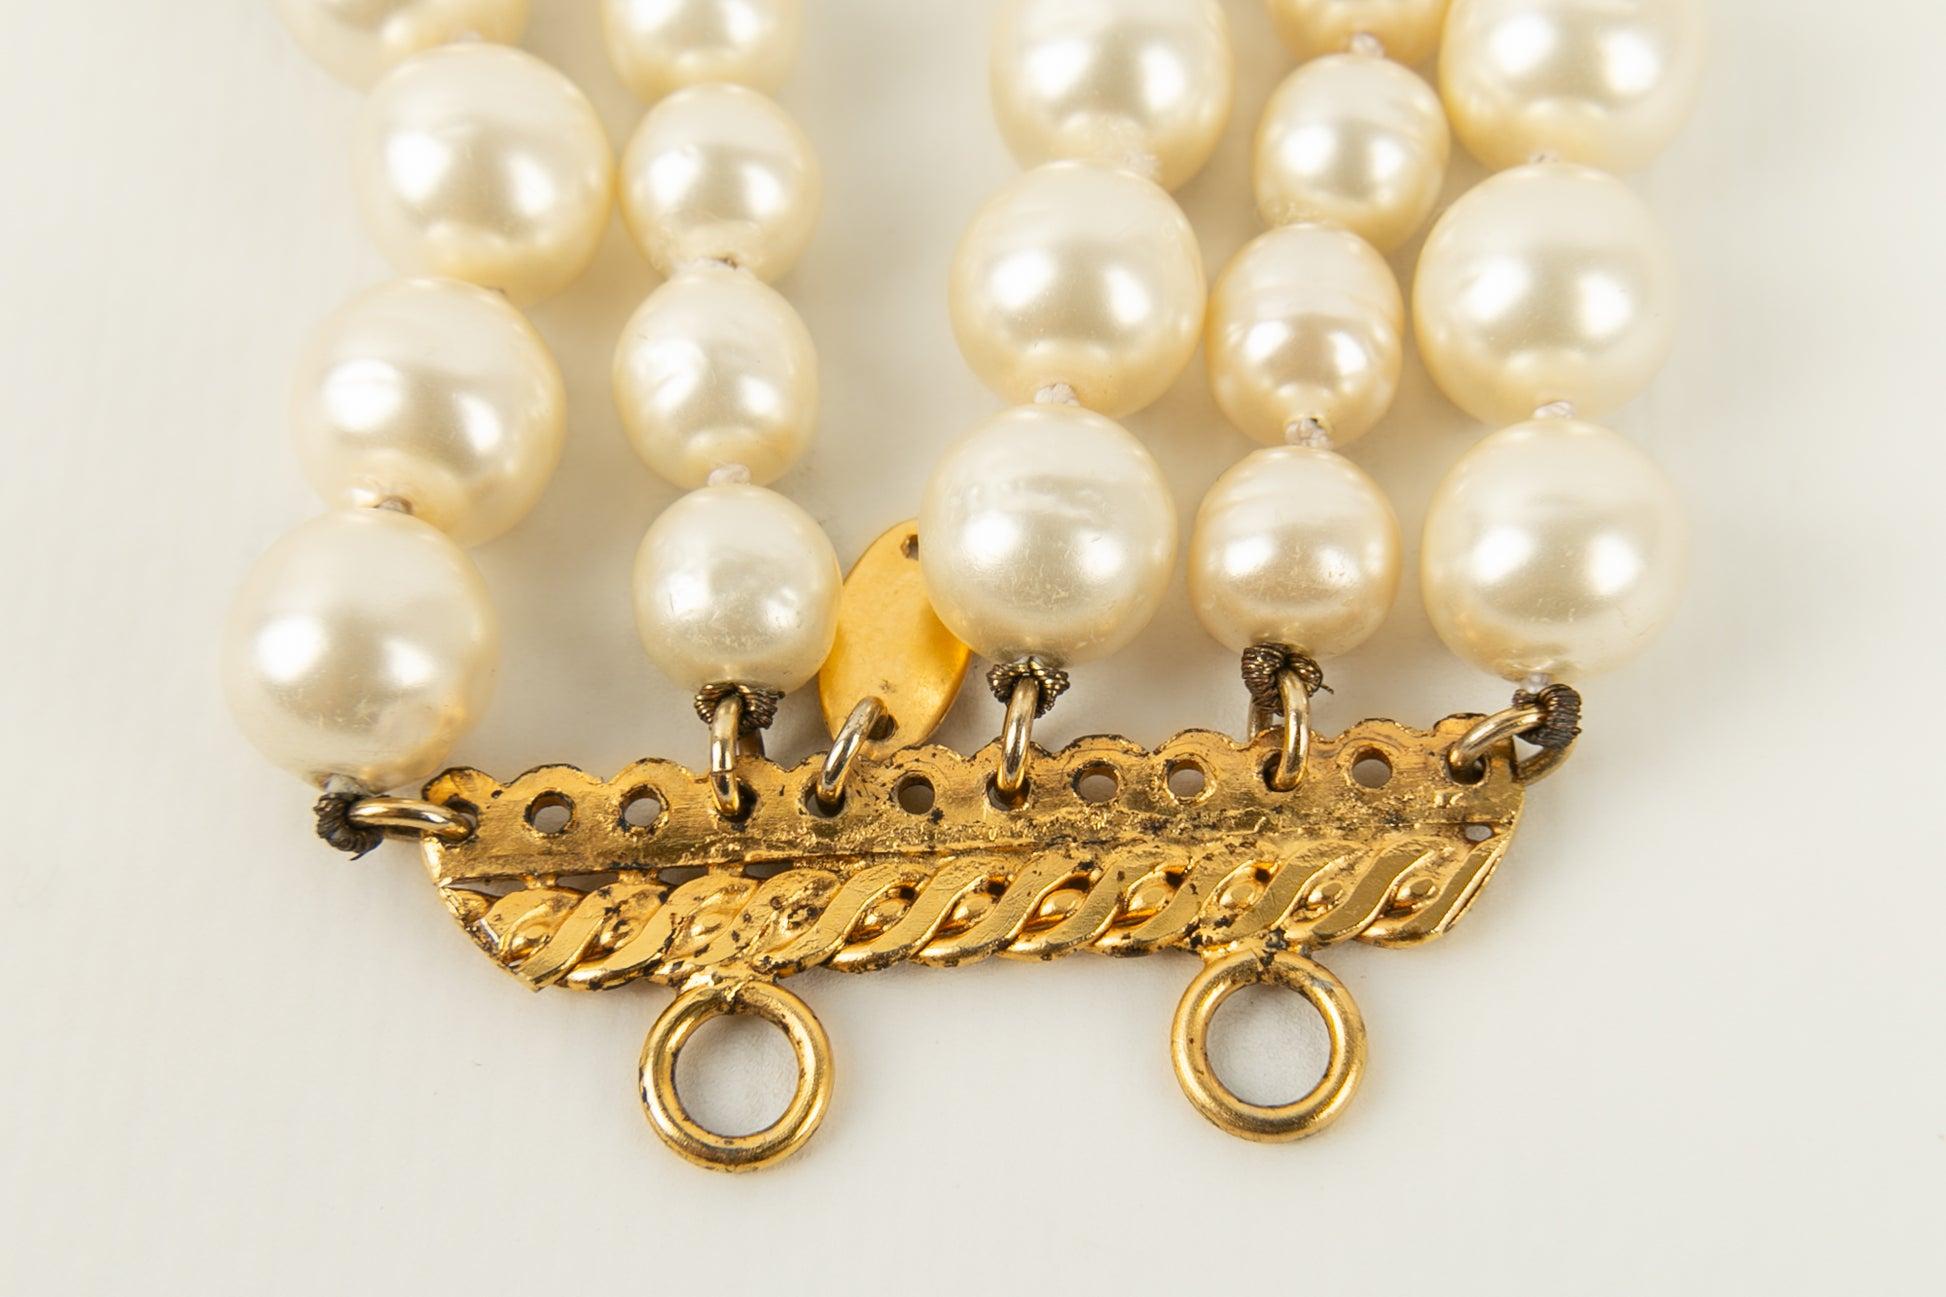 Chanel Bracelet with Pearly Beads and a Fastener in Golden Metal, 1980s For Sale 2